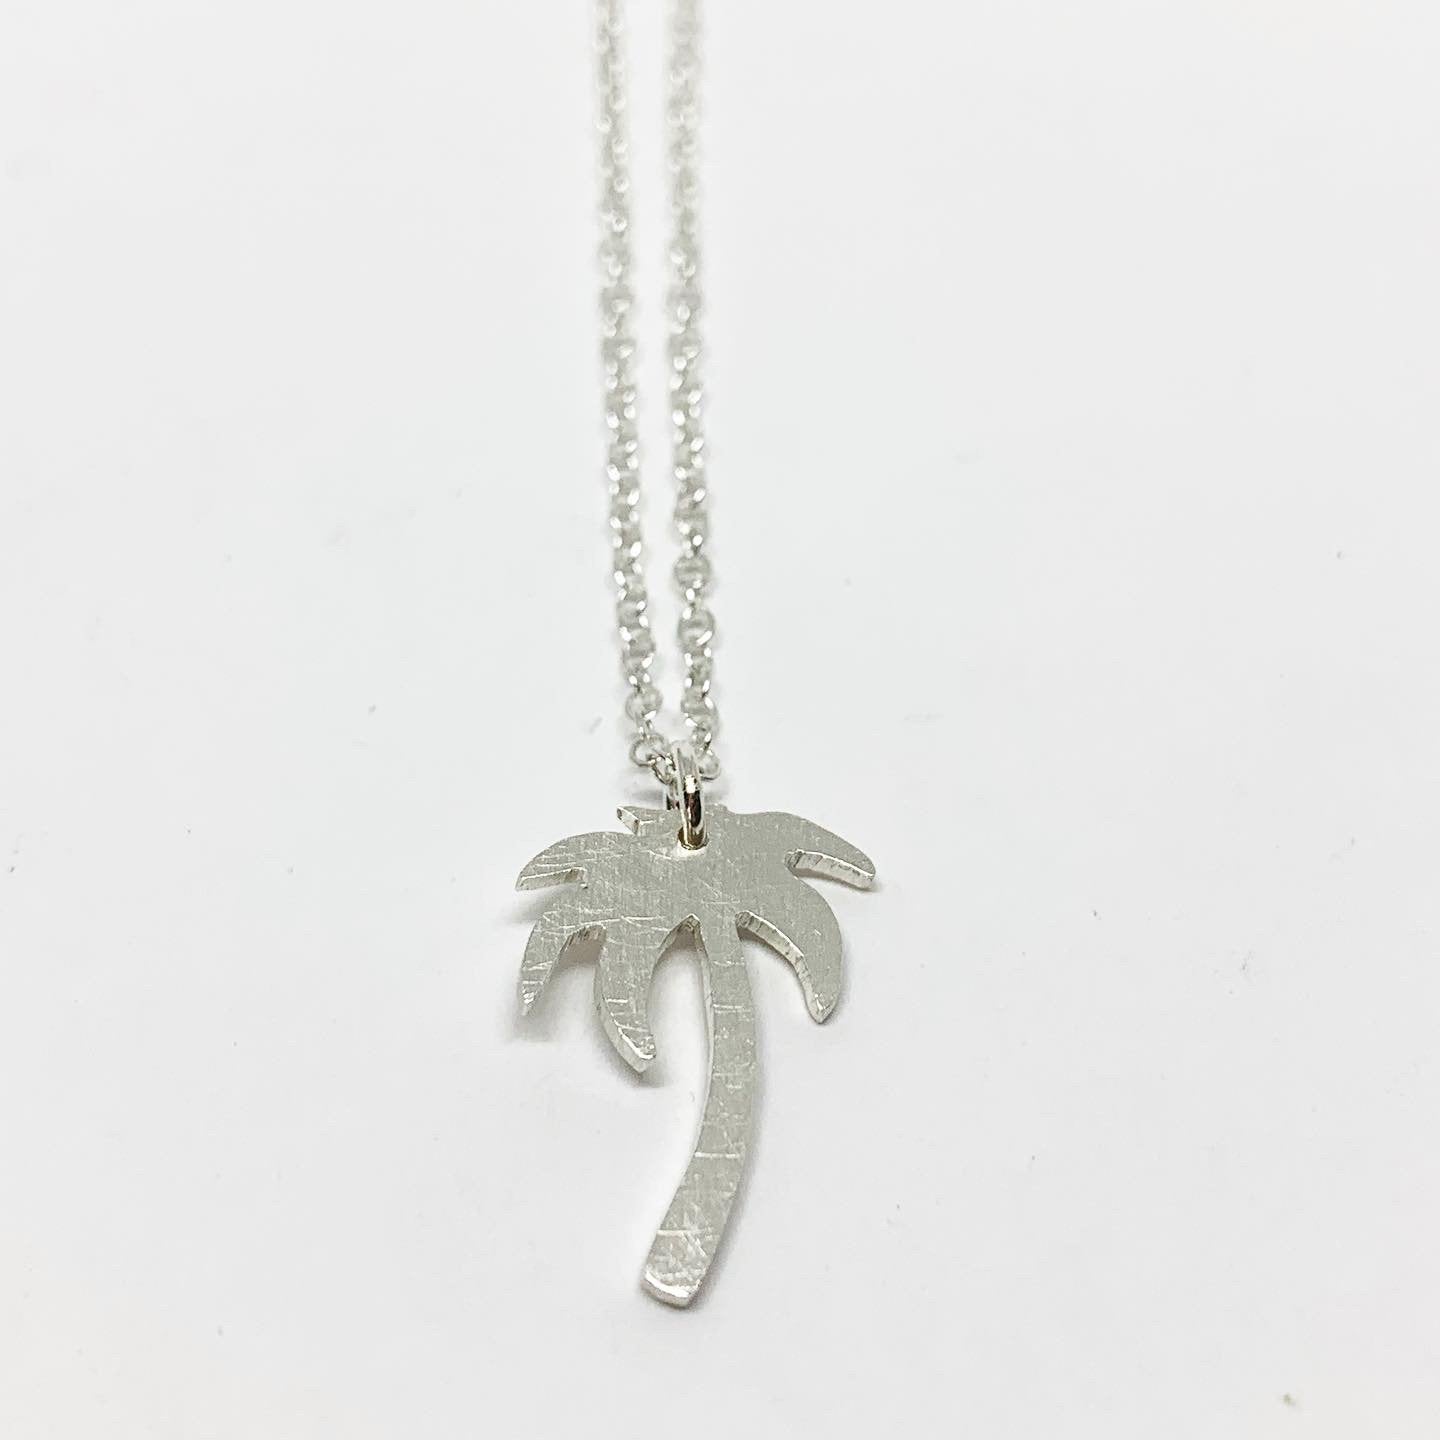 Handmade Palm Tree Charm Necklace - Forest & Sea Collection - Jewelry & Watches - Bijou Her -  -  - 